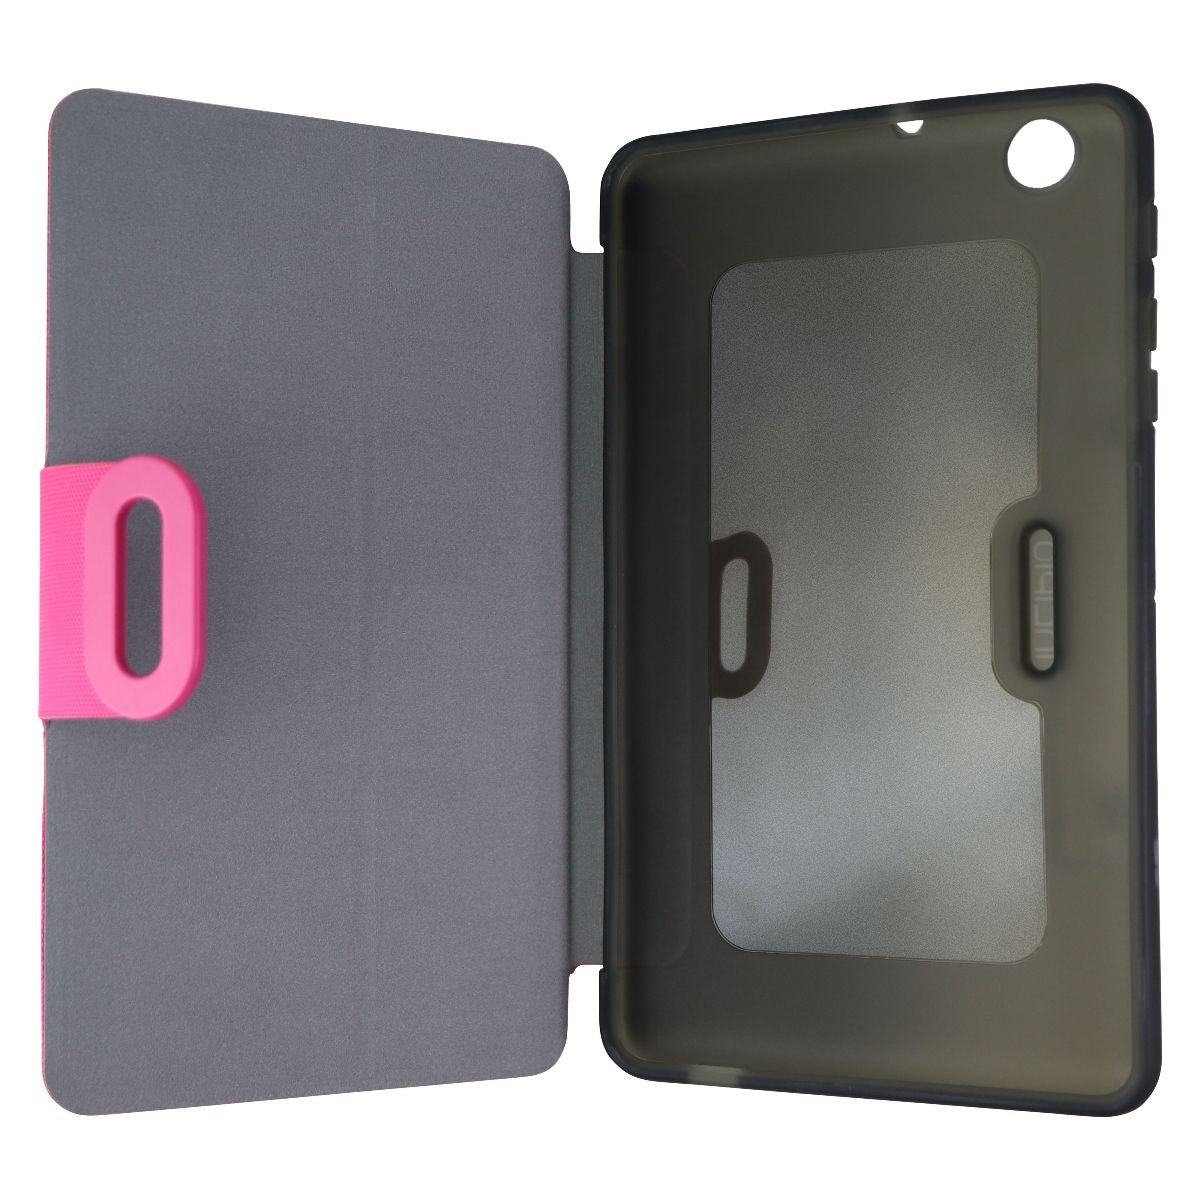 Incipio Clarion Shock Absorbing Gel Case for AT&T Trek 2 HD - Pink/Smoke iPad/Tablet Accessories - Cases, Covers, Keyboard Folios Incipio    - Simple Cell Bulk Wholesale Pricing - USA Seller